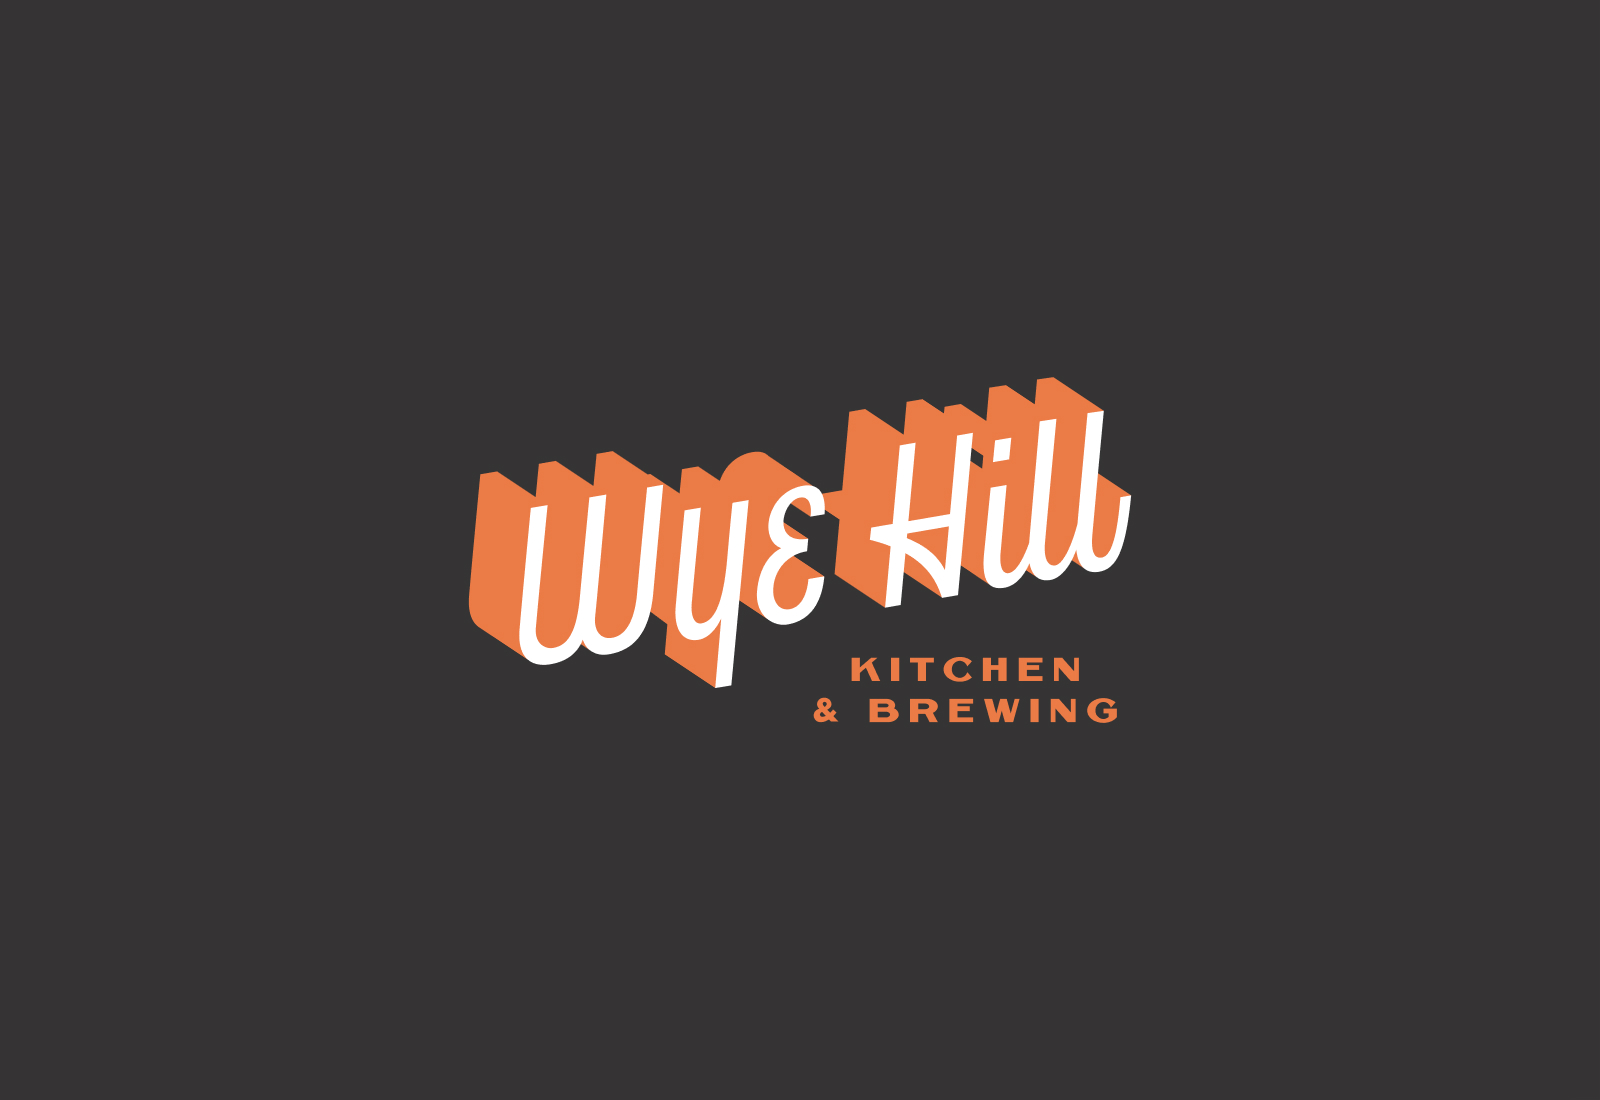 Primary Logo with Block Shadow | Brand Identity for Wye Hill Kitchen and Brewing in Raleigh, NC